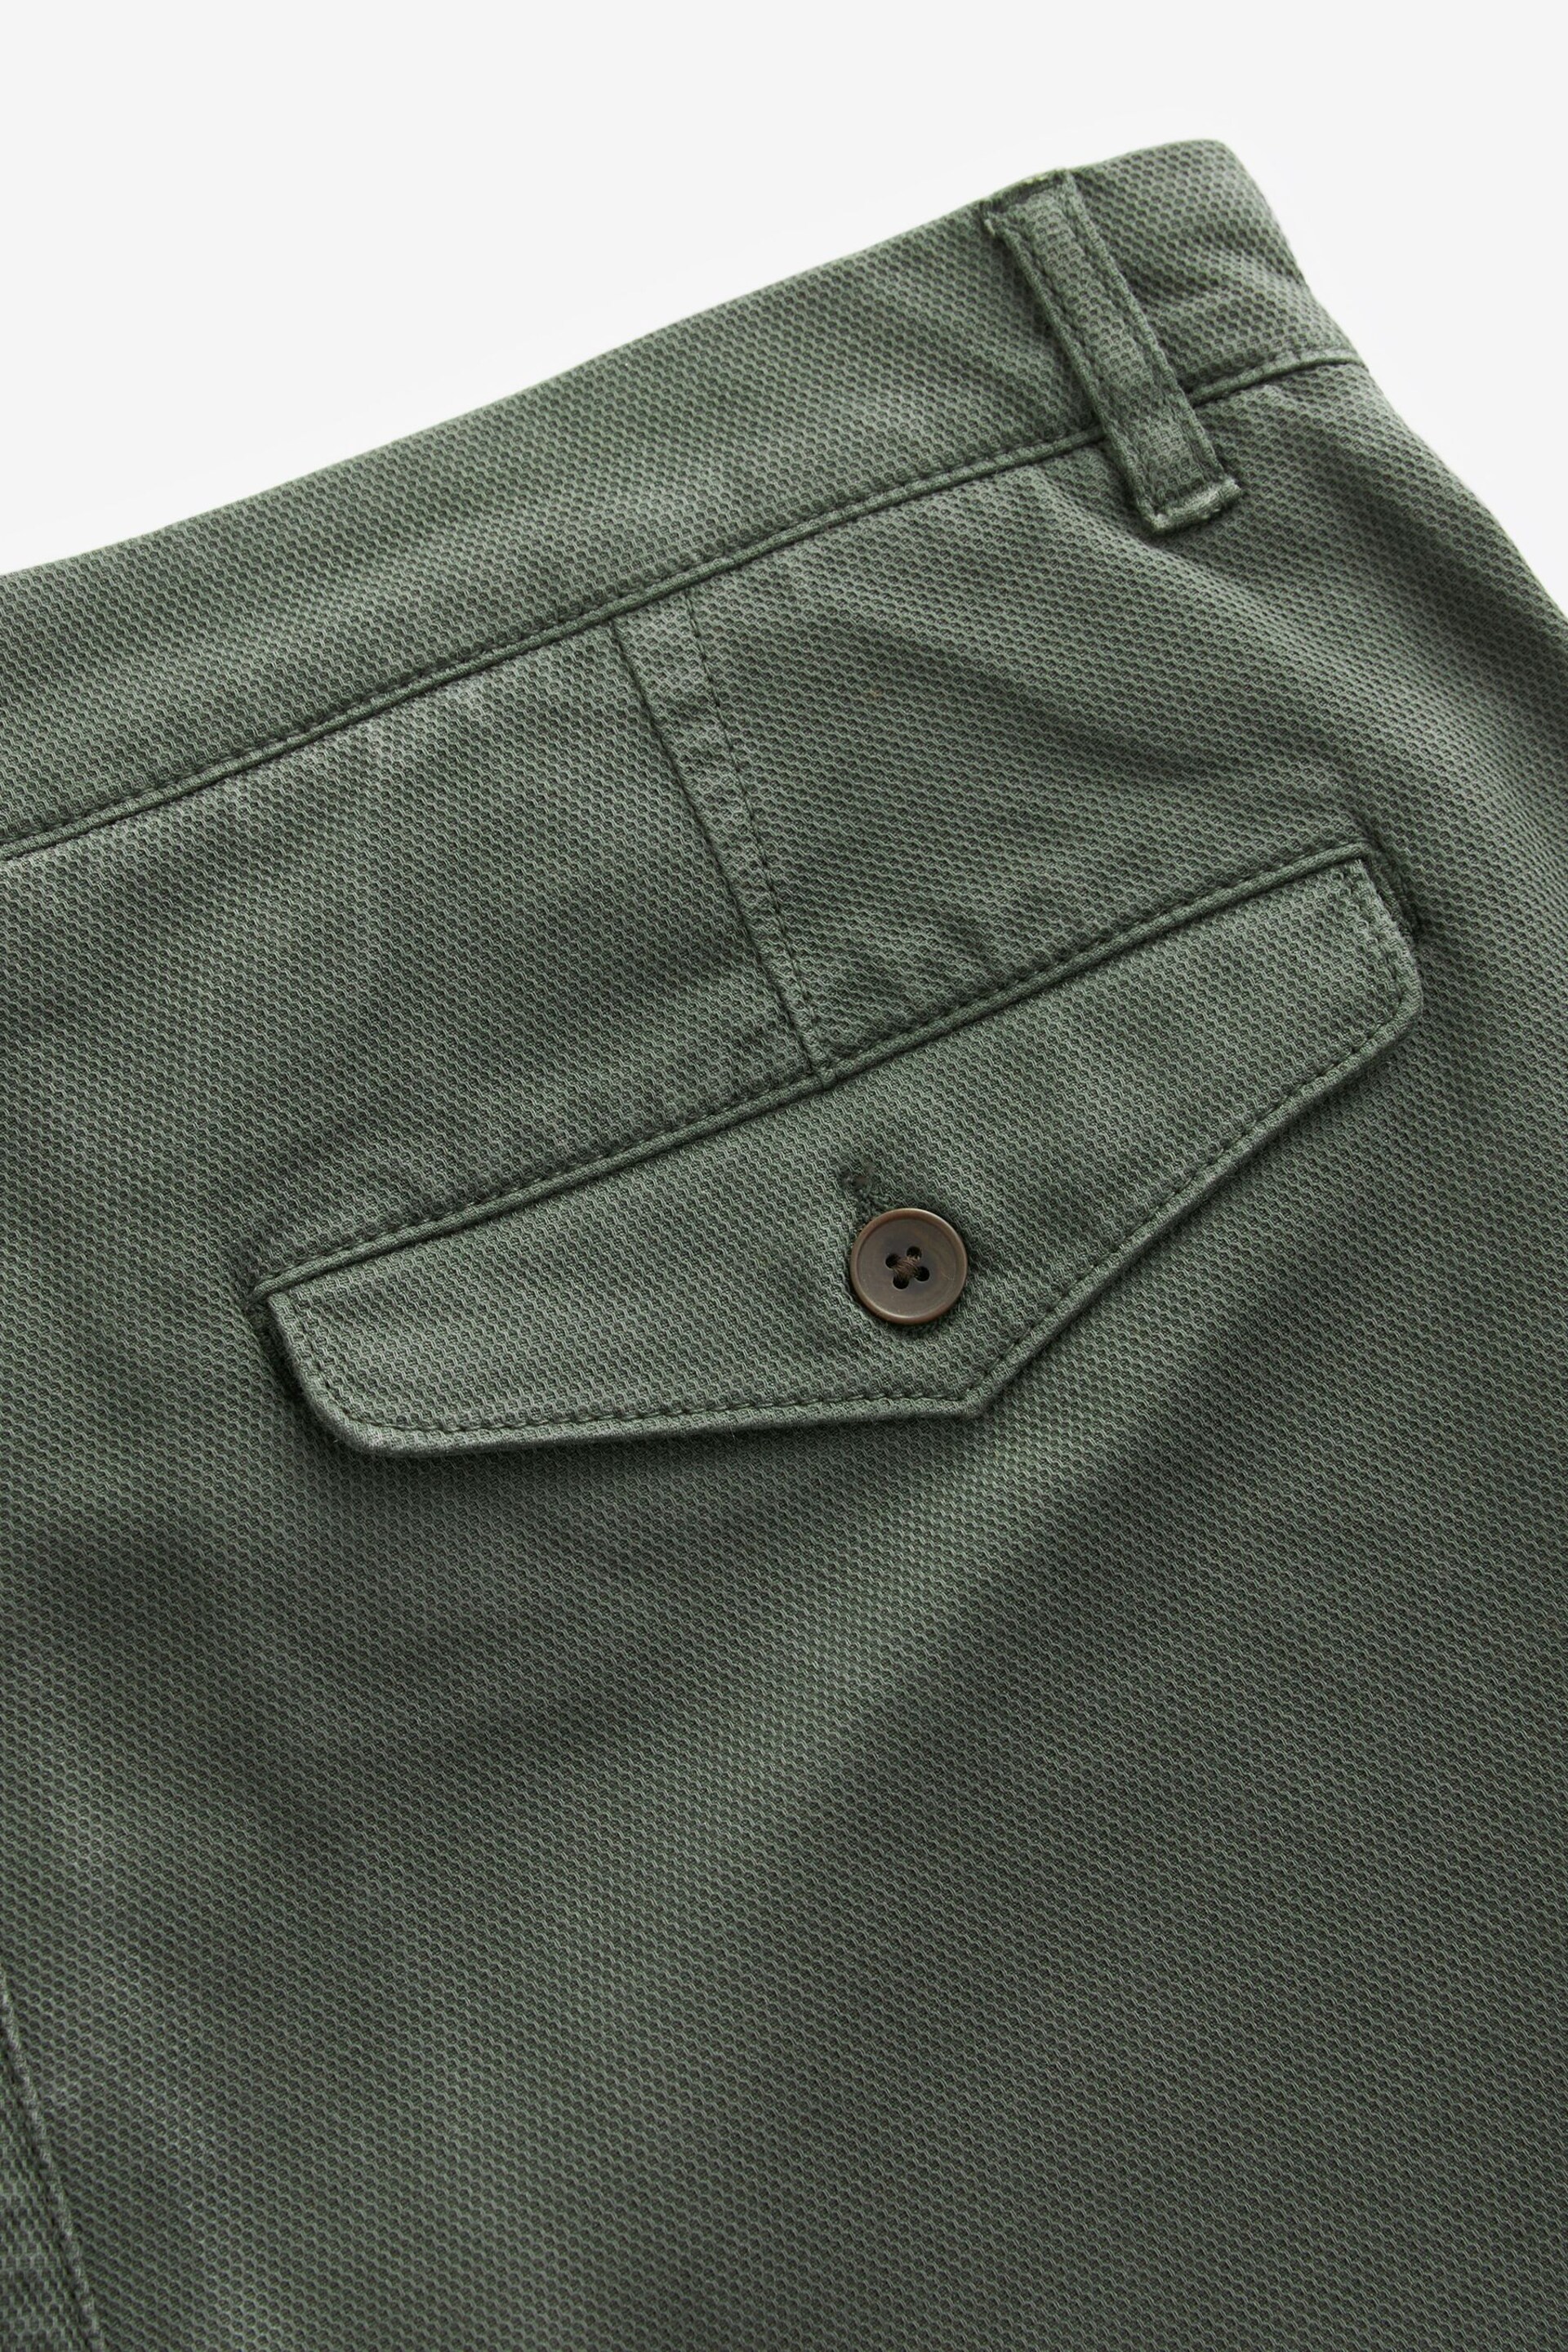 Green Slim Fit Textured Belted Trousers - Image 7 of 9